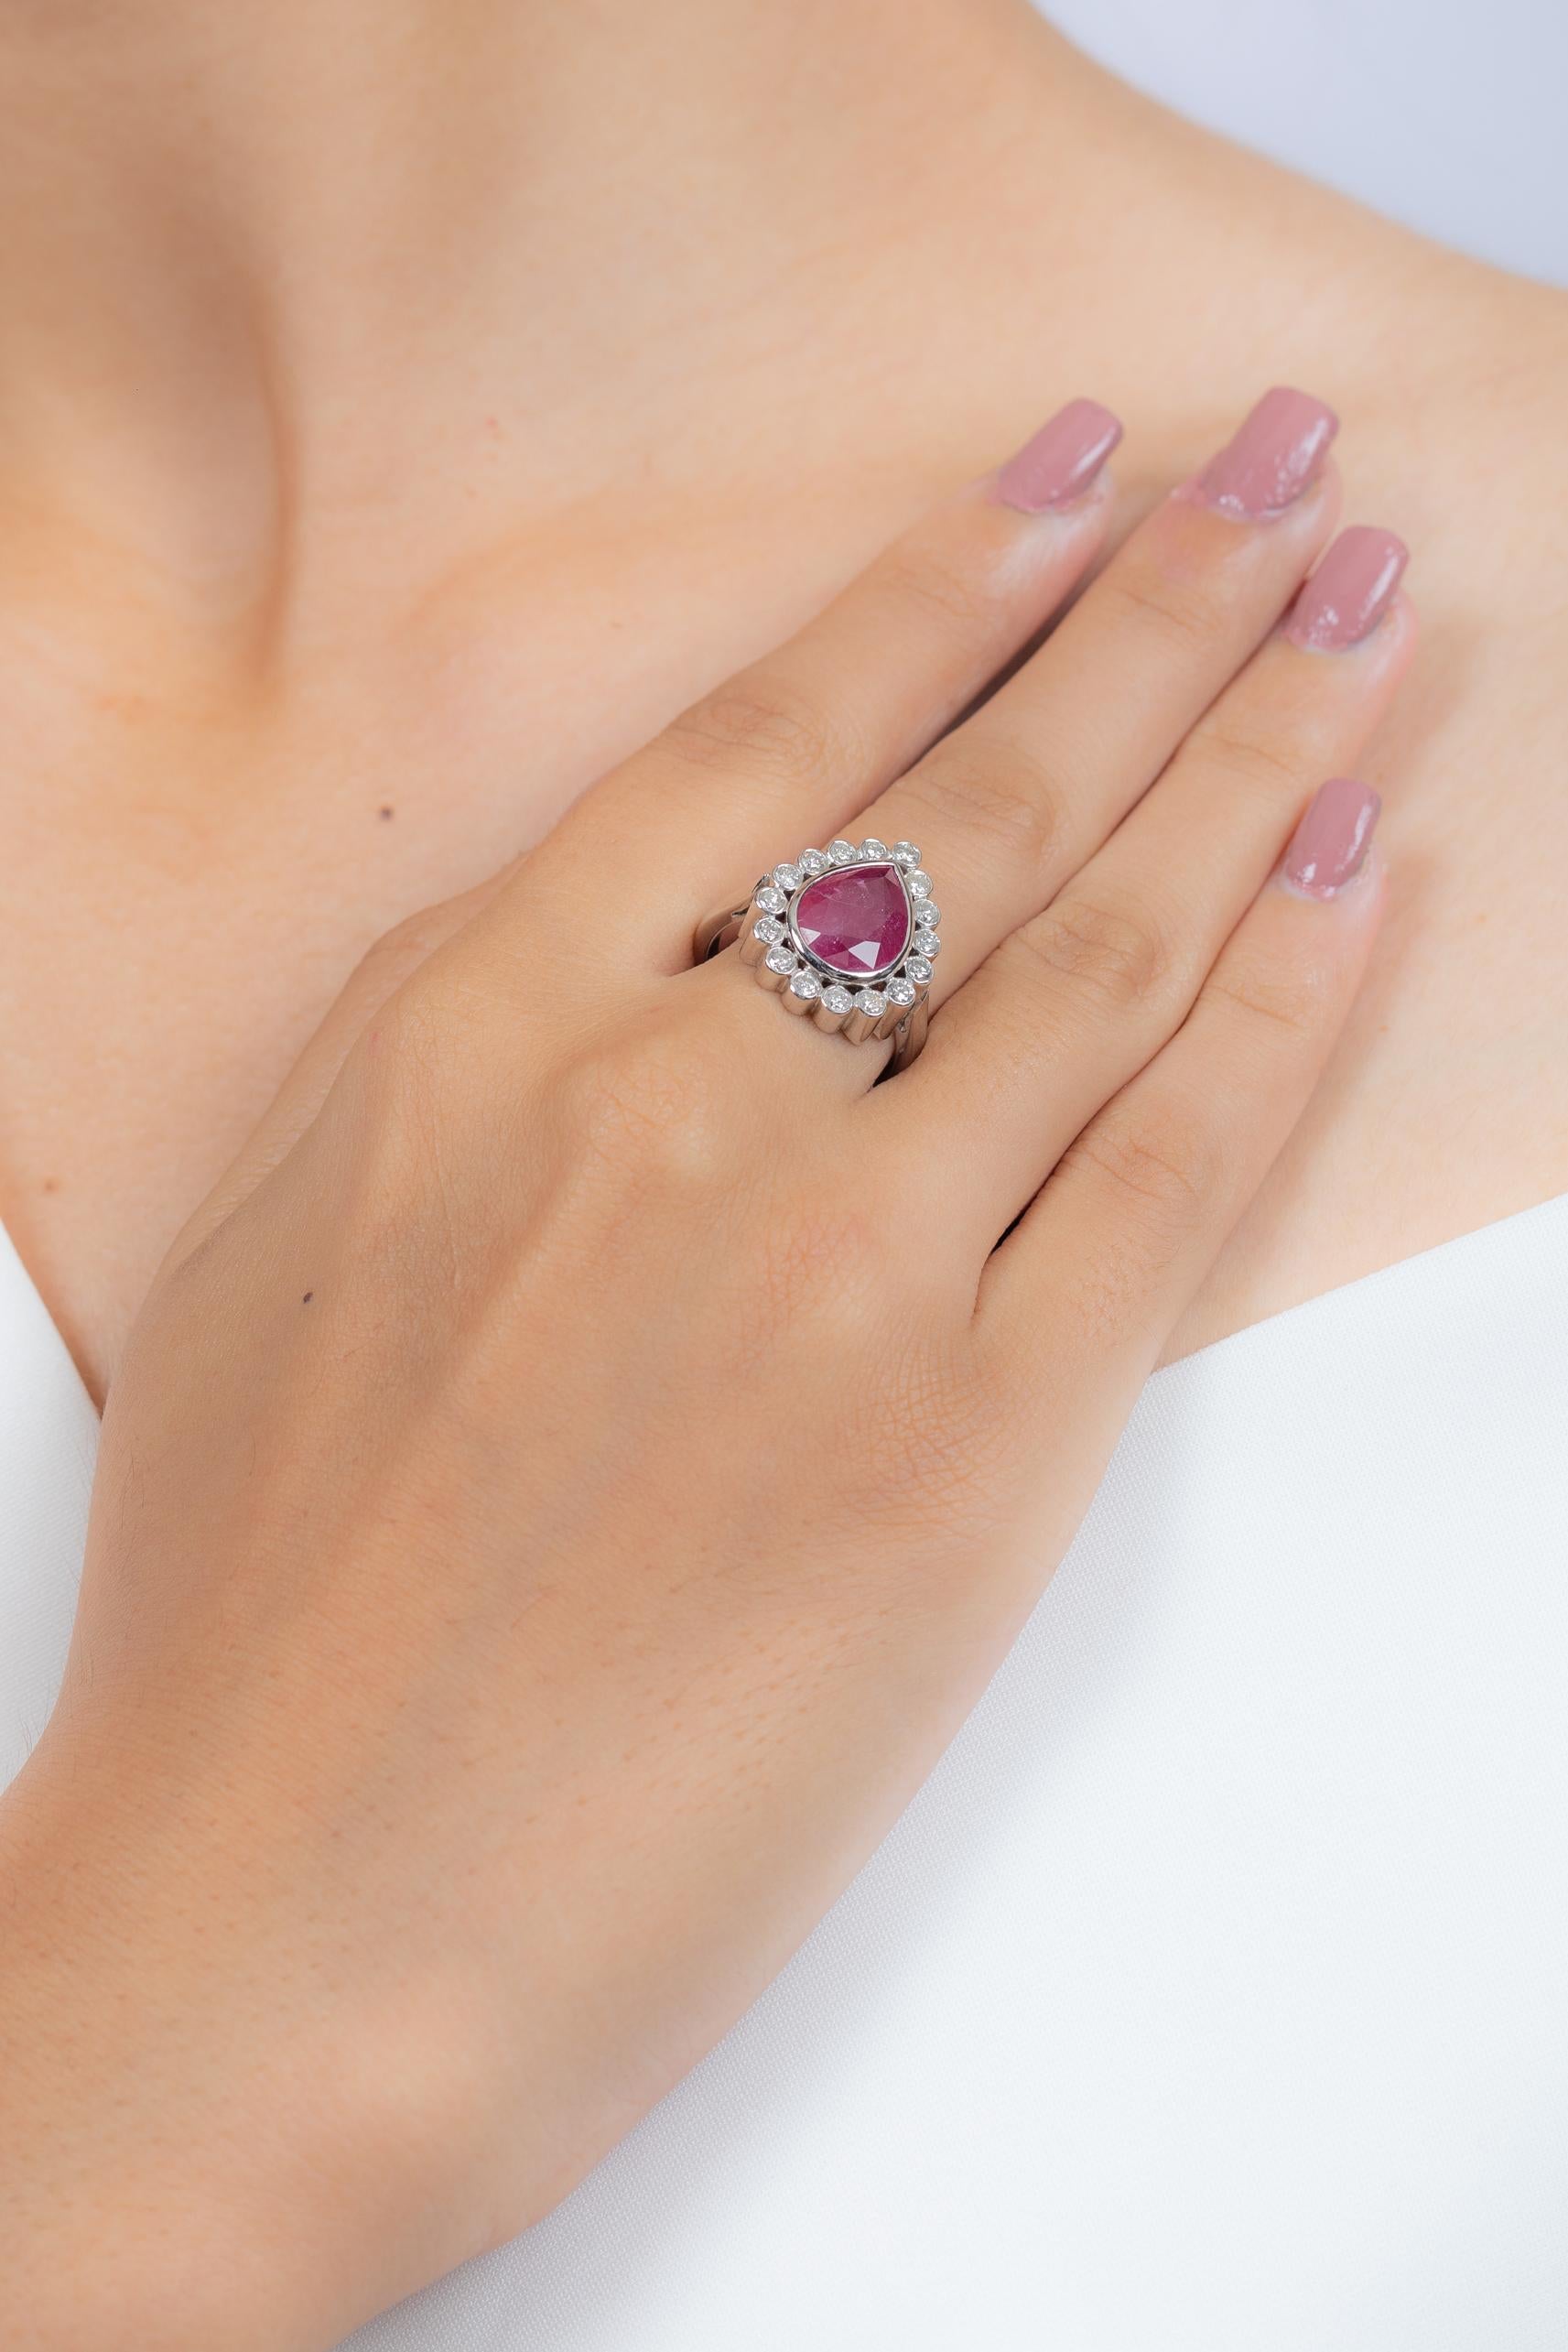 For Sale:  18K White Gold Pear Cut Ruby Cocktail Ring with Diamonds 4